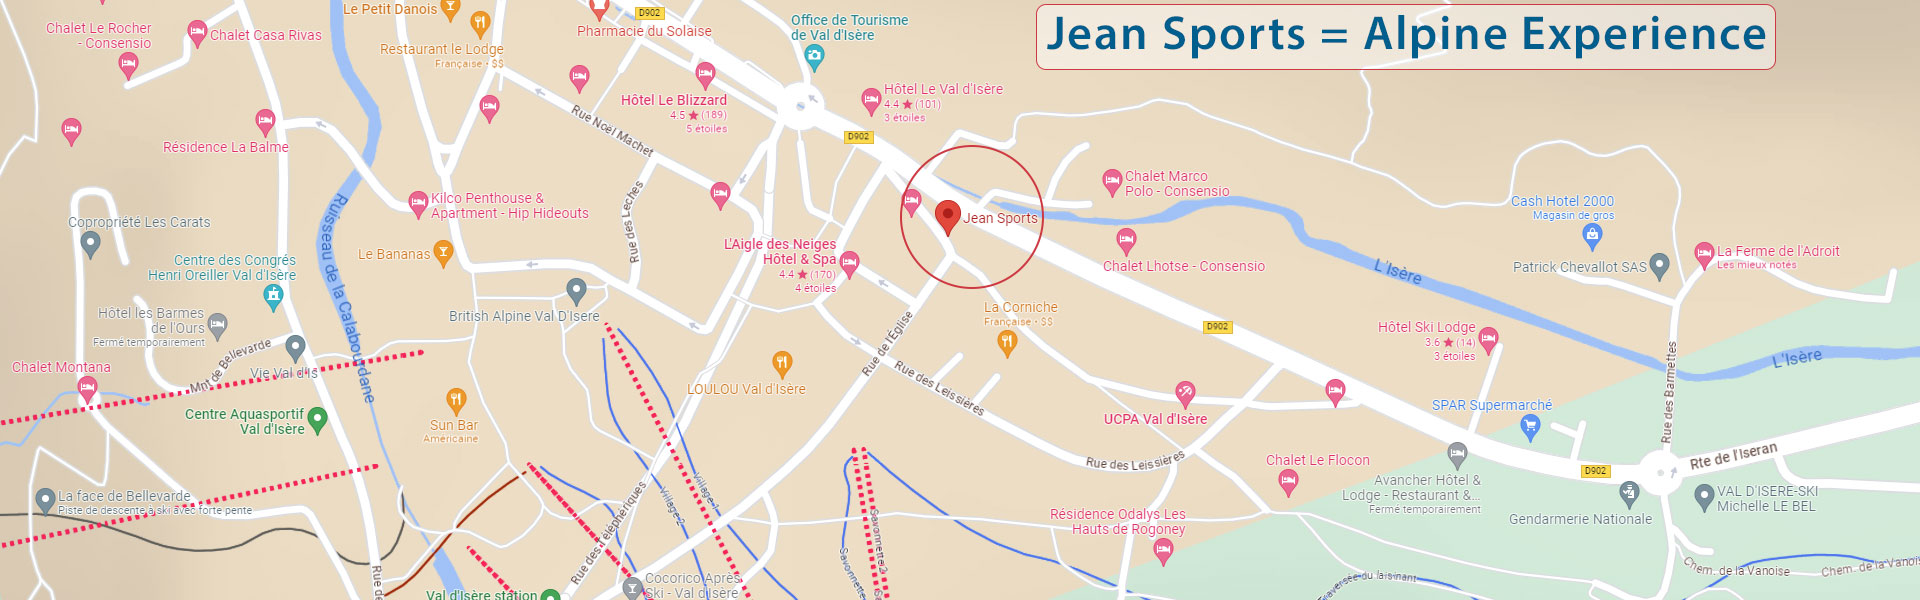 Map to find Alpine Experience at Jean Sports Val-d'Isere on Google Map